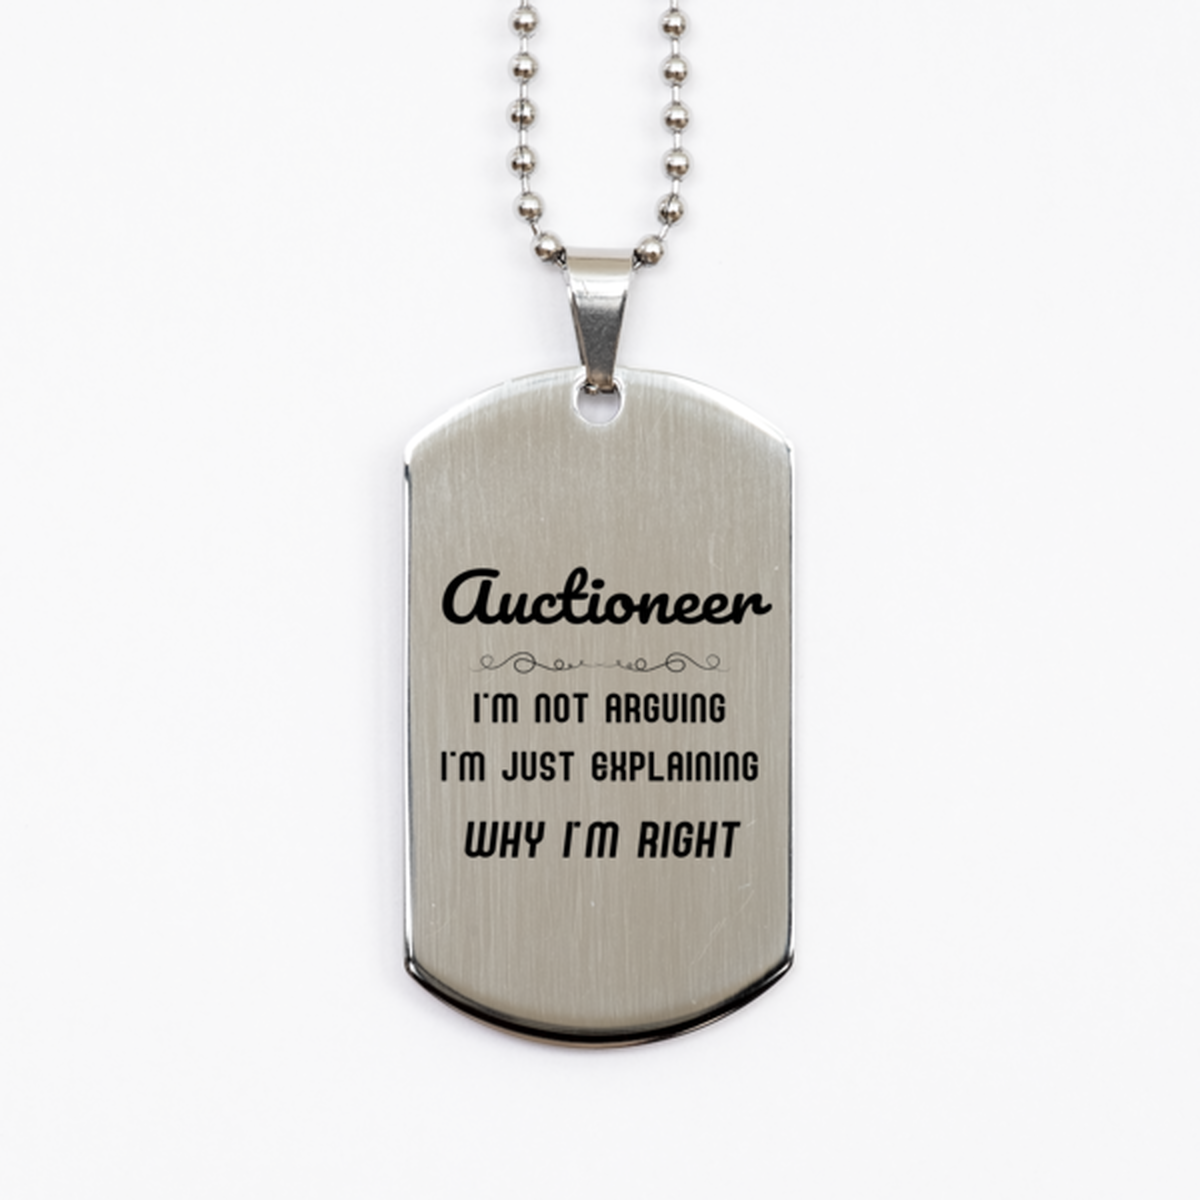 Auctioneer I'm not Arguing. I'm Just Explaining Why I'm RIGHT Silver Dog Tag, Funny Saying Quote Auctioneer Gifts For Auctioneer Graduation Birthday Christmas Gifts for Men Women Coworker